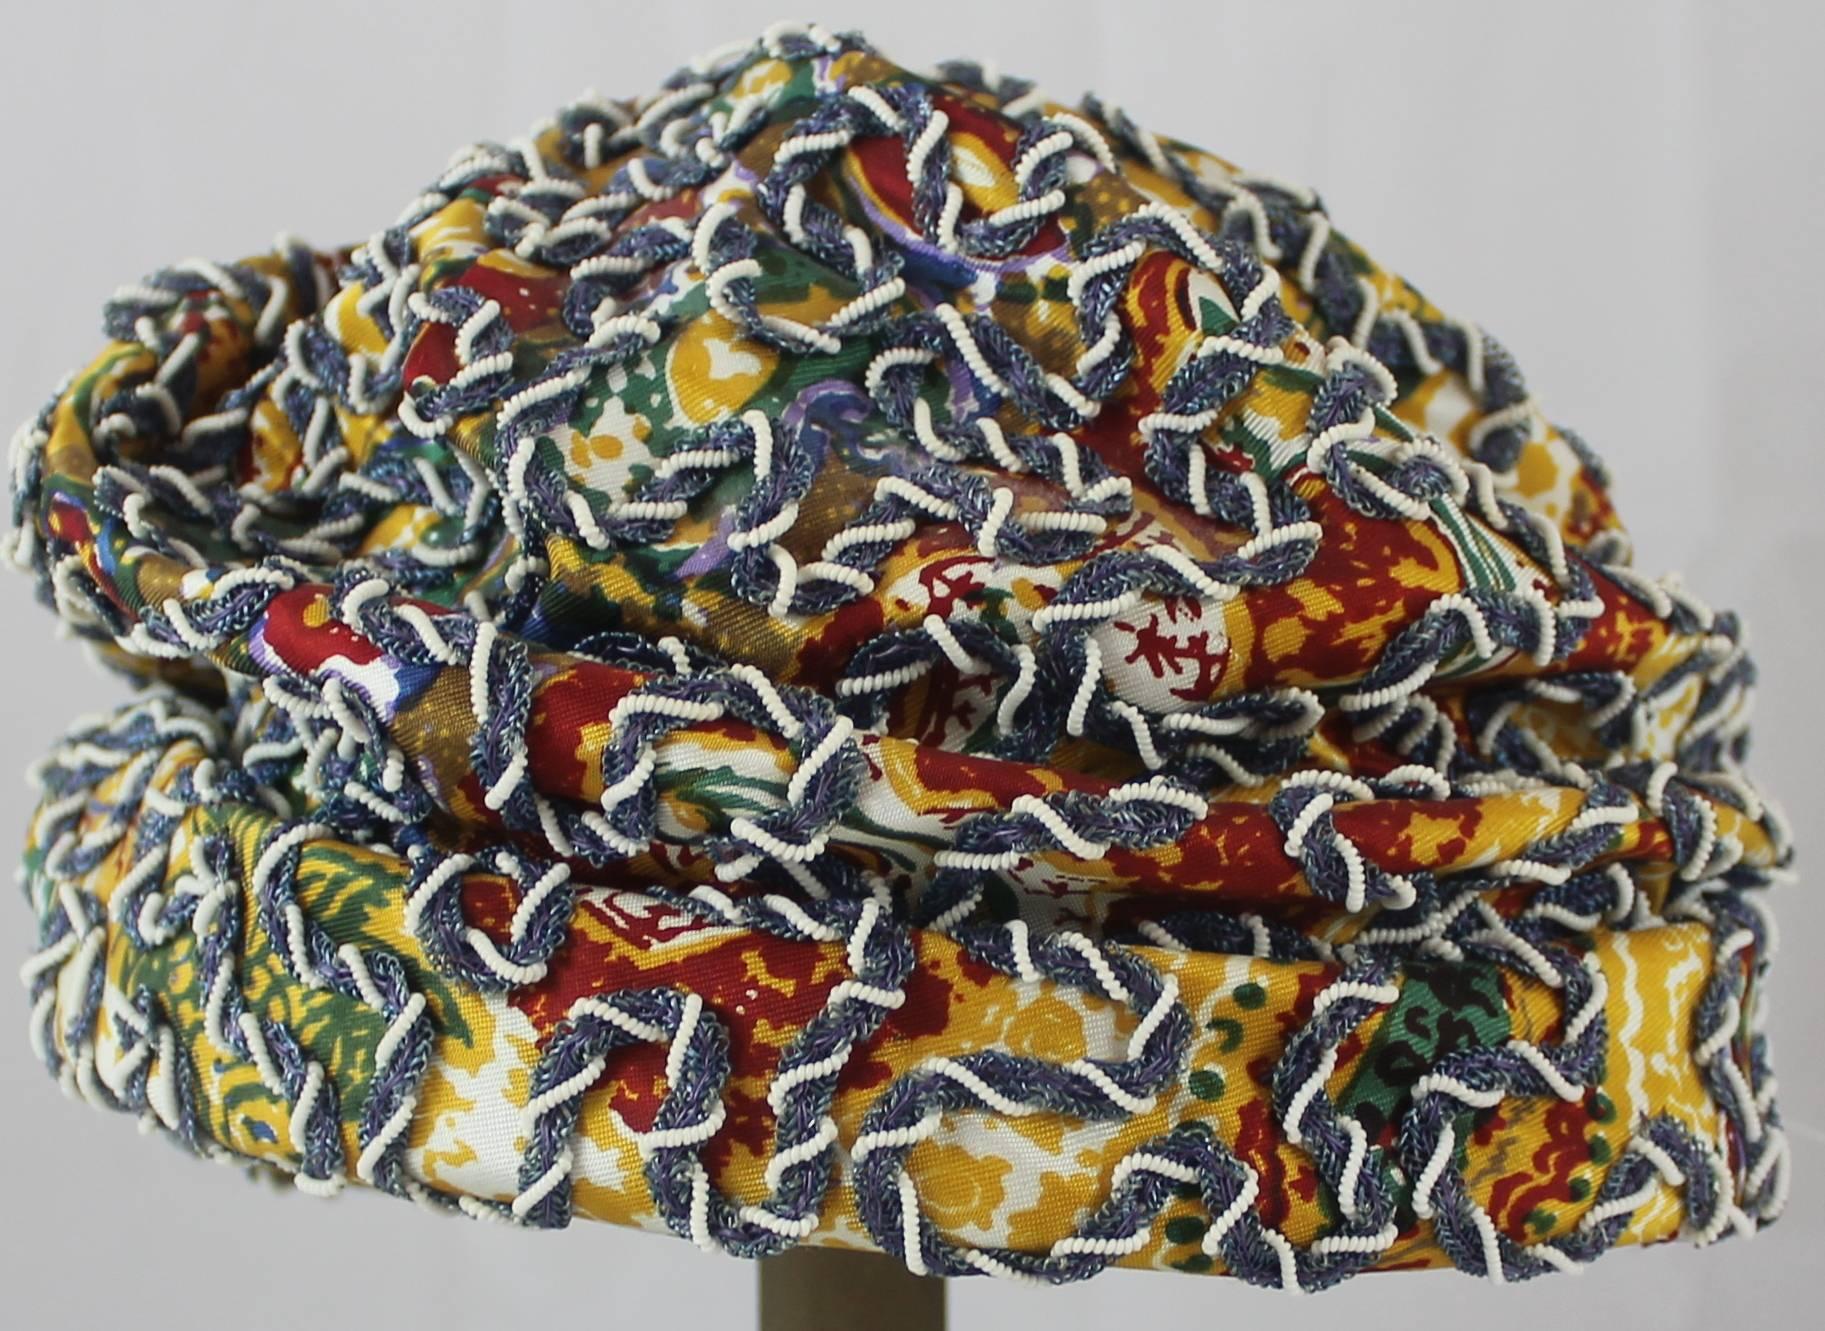 Strawbridge & Clothier Vintage Multicolor Ruched Embroidered Hat - 1960's. This hat is in very good vintage condition with some threads and beading starting to come loose. It has a yellow and multicolor printed background with purple, blue, and